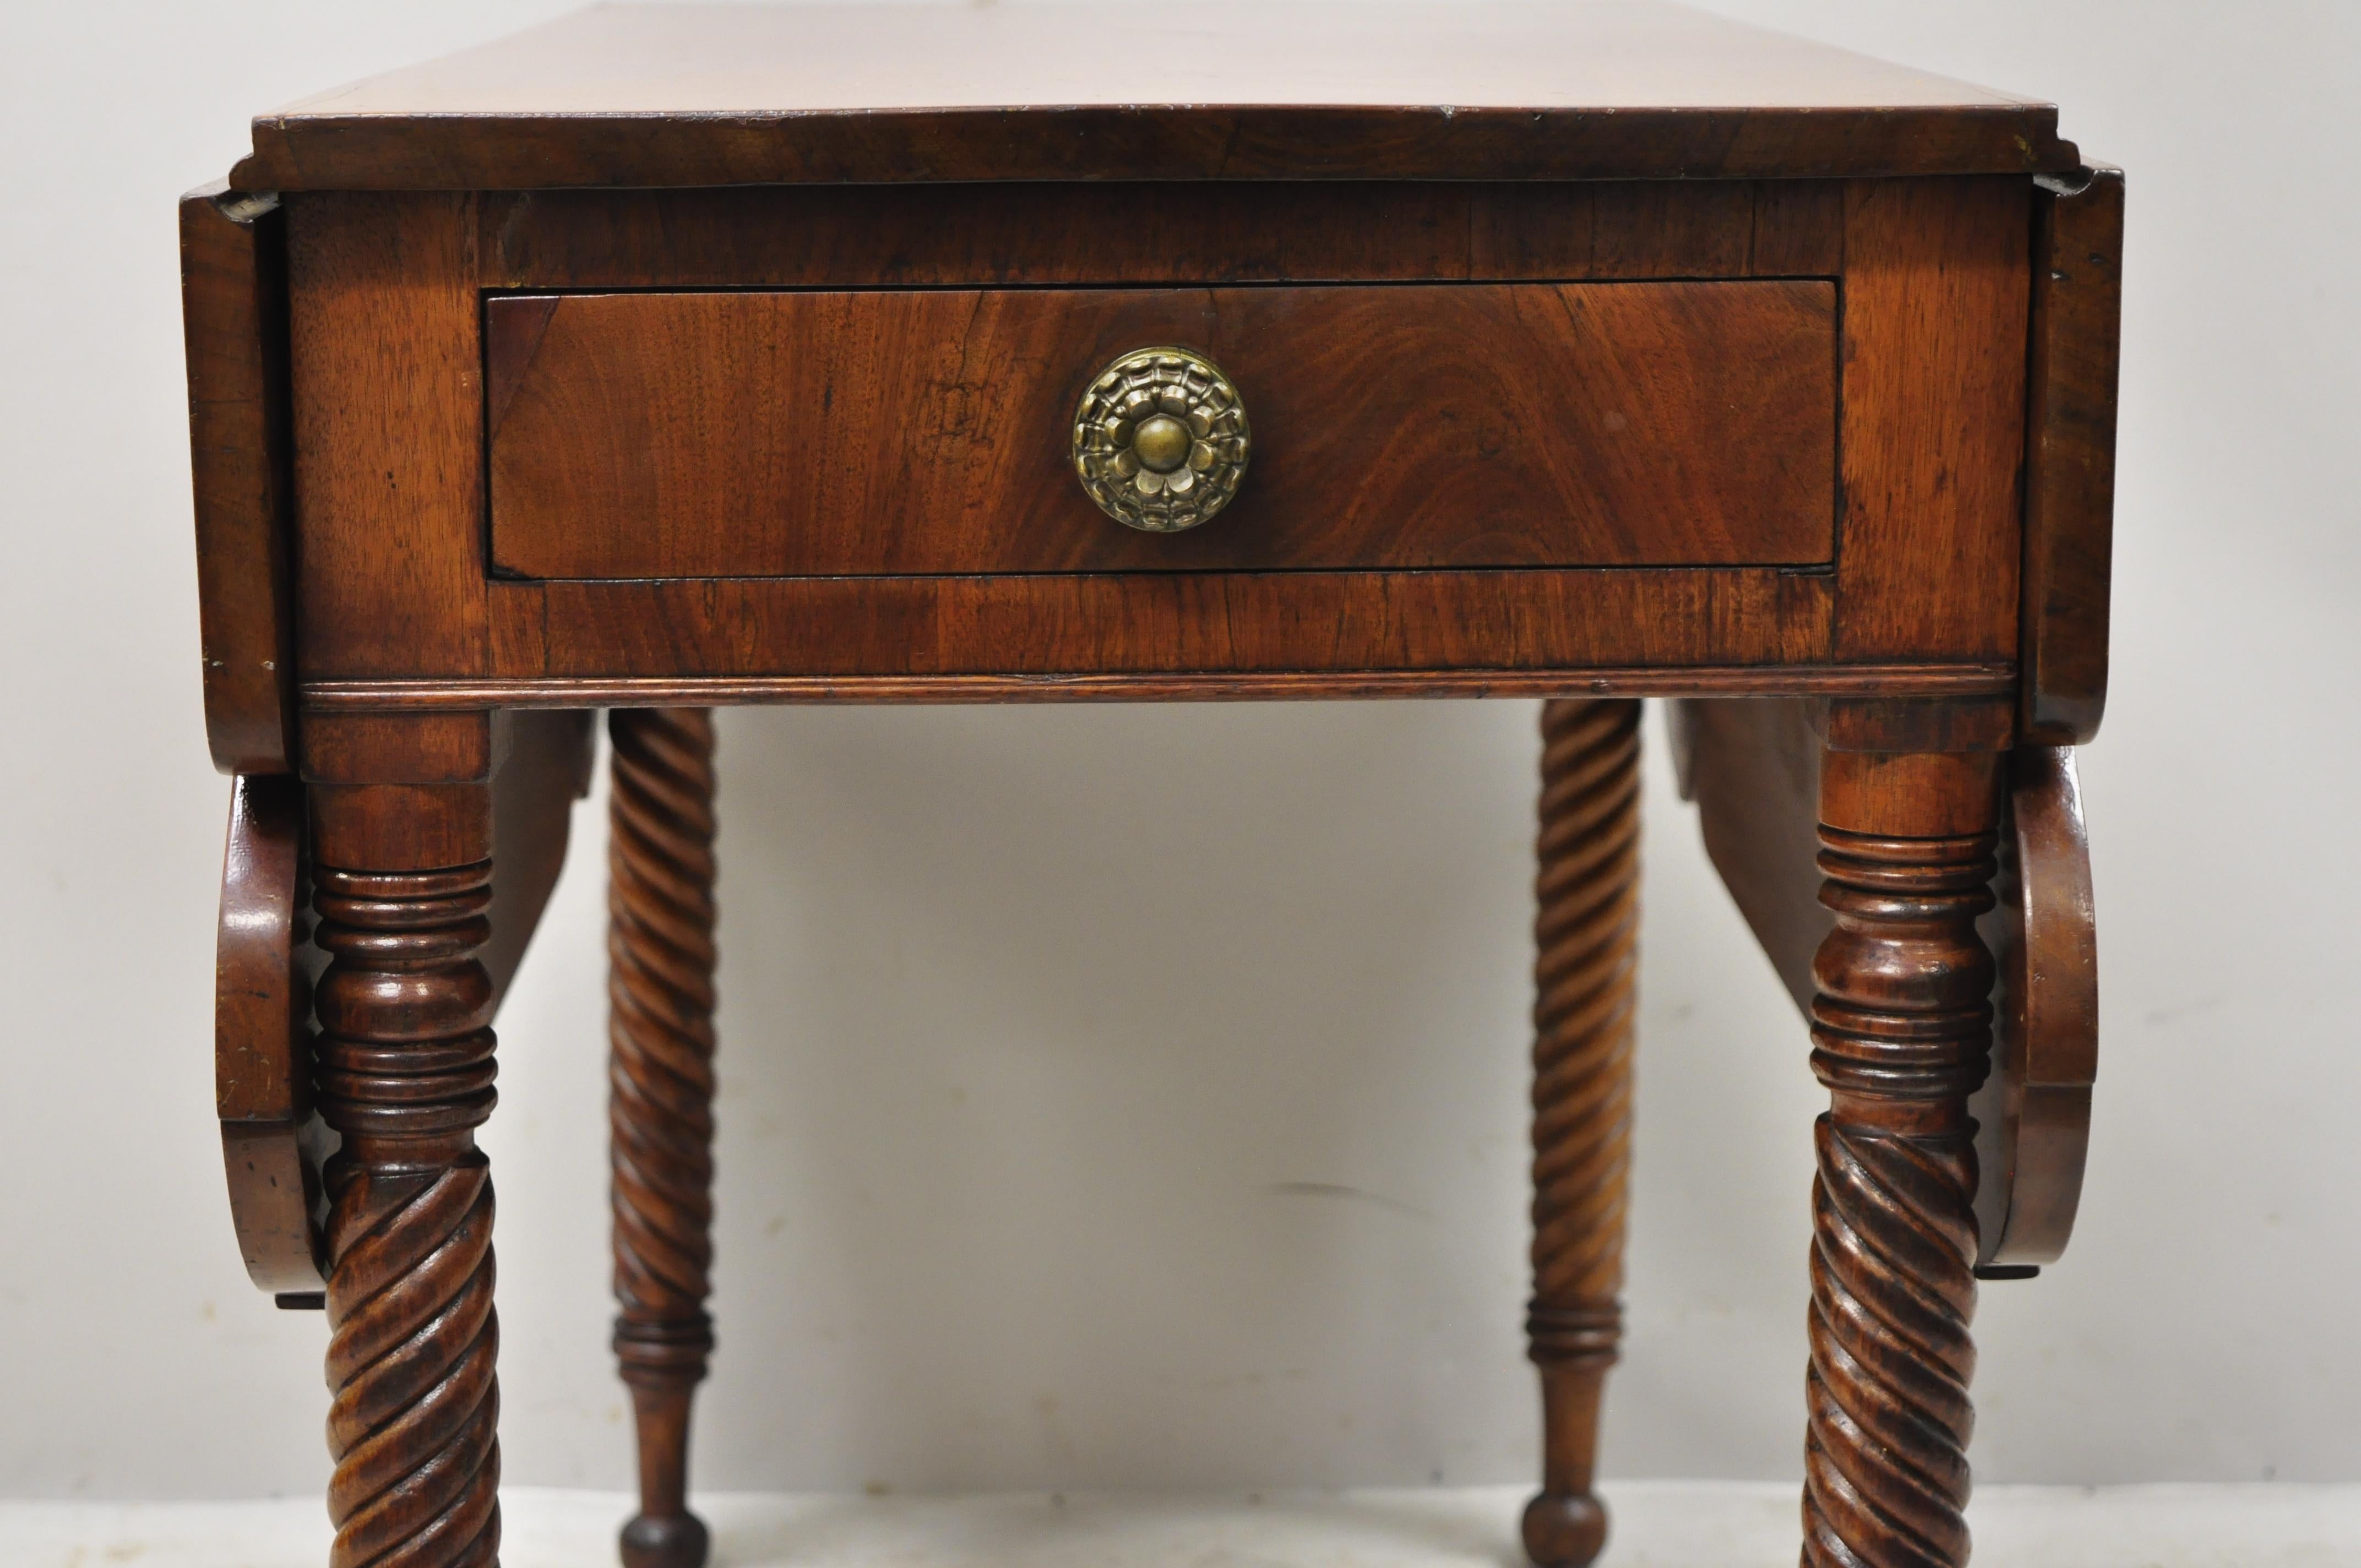 North American 19th Century Scallop Carved Drop Leaf Mahogany Breakfast Dining Table 1-Drawer